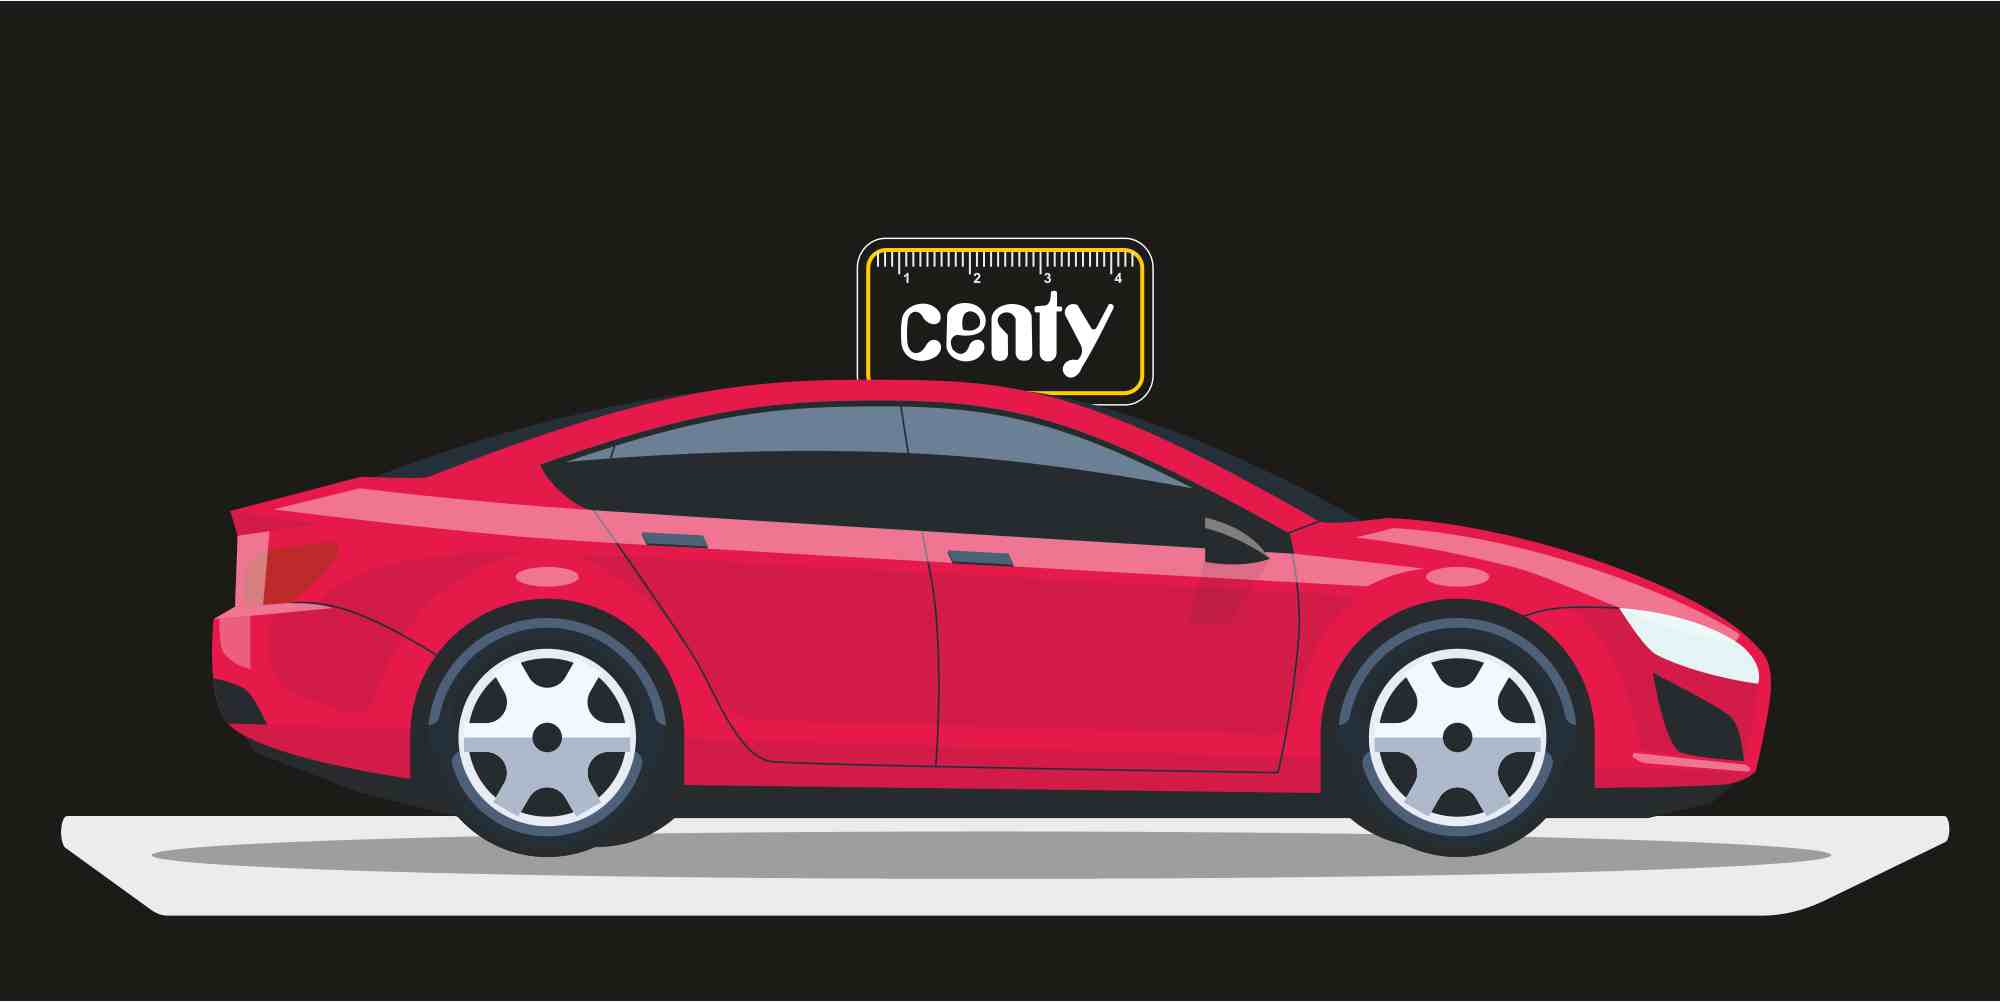 Centy Toys_Hover image